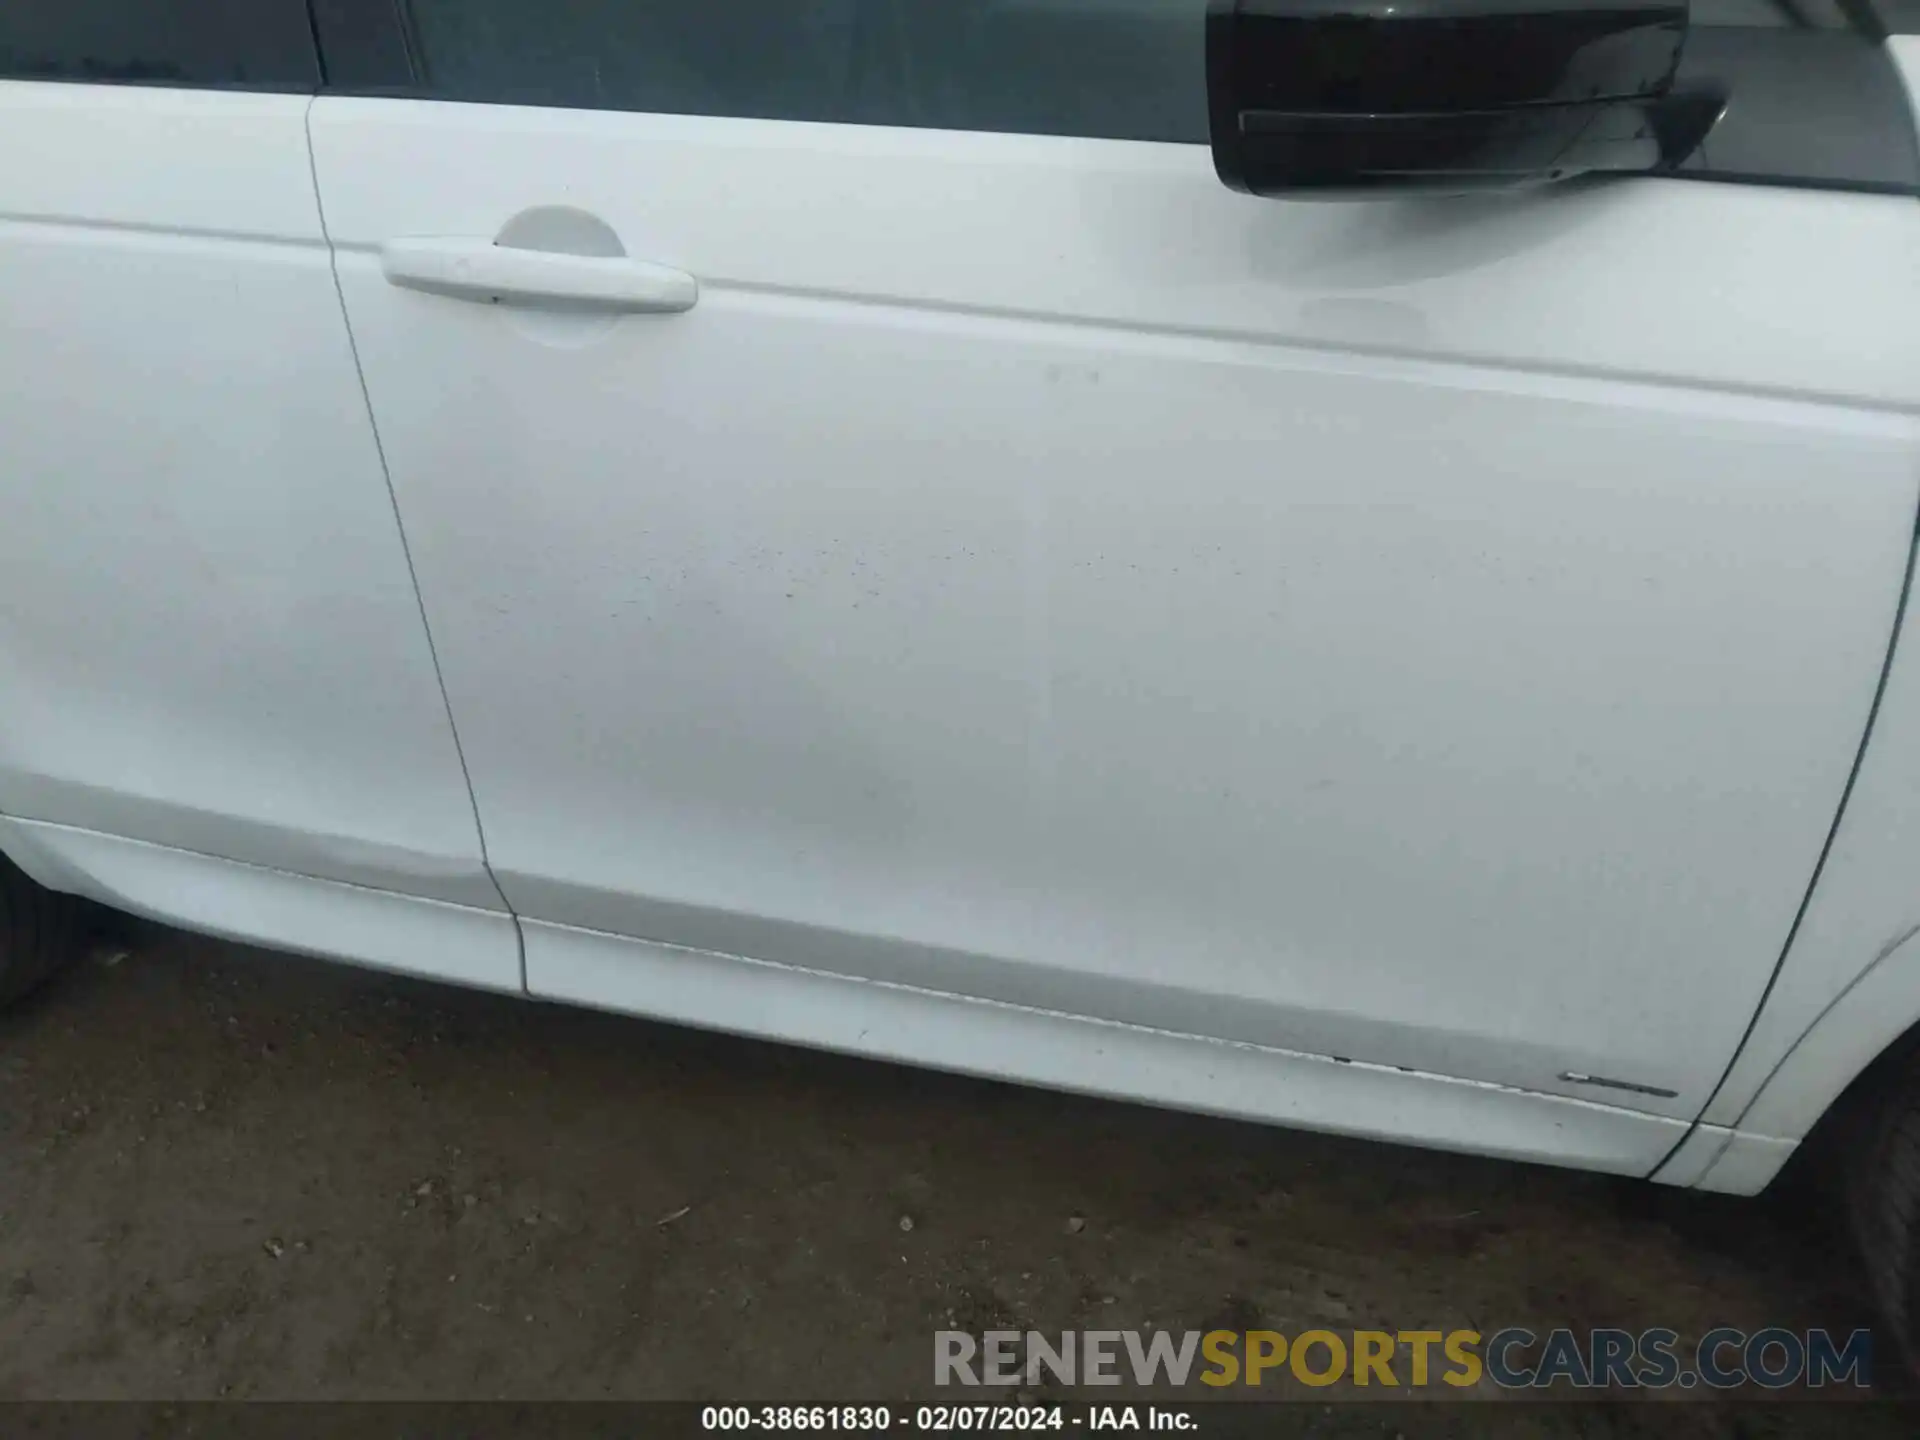 19 Photograph of a damaged car SALCT2FXXLH859485 LAND ROVER DISCOVERY SPORT 2020